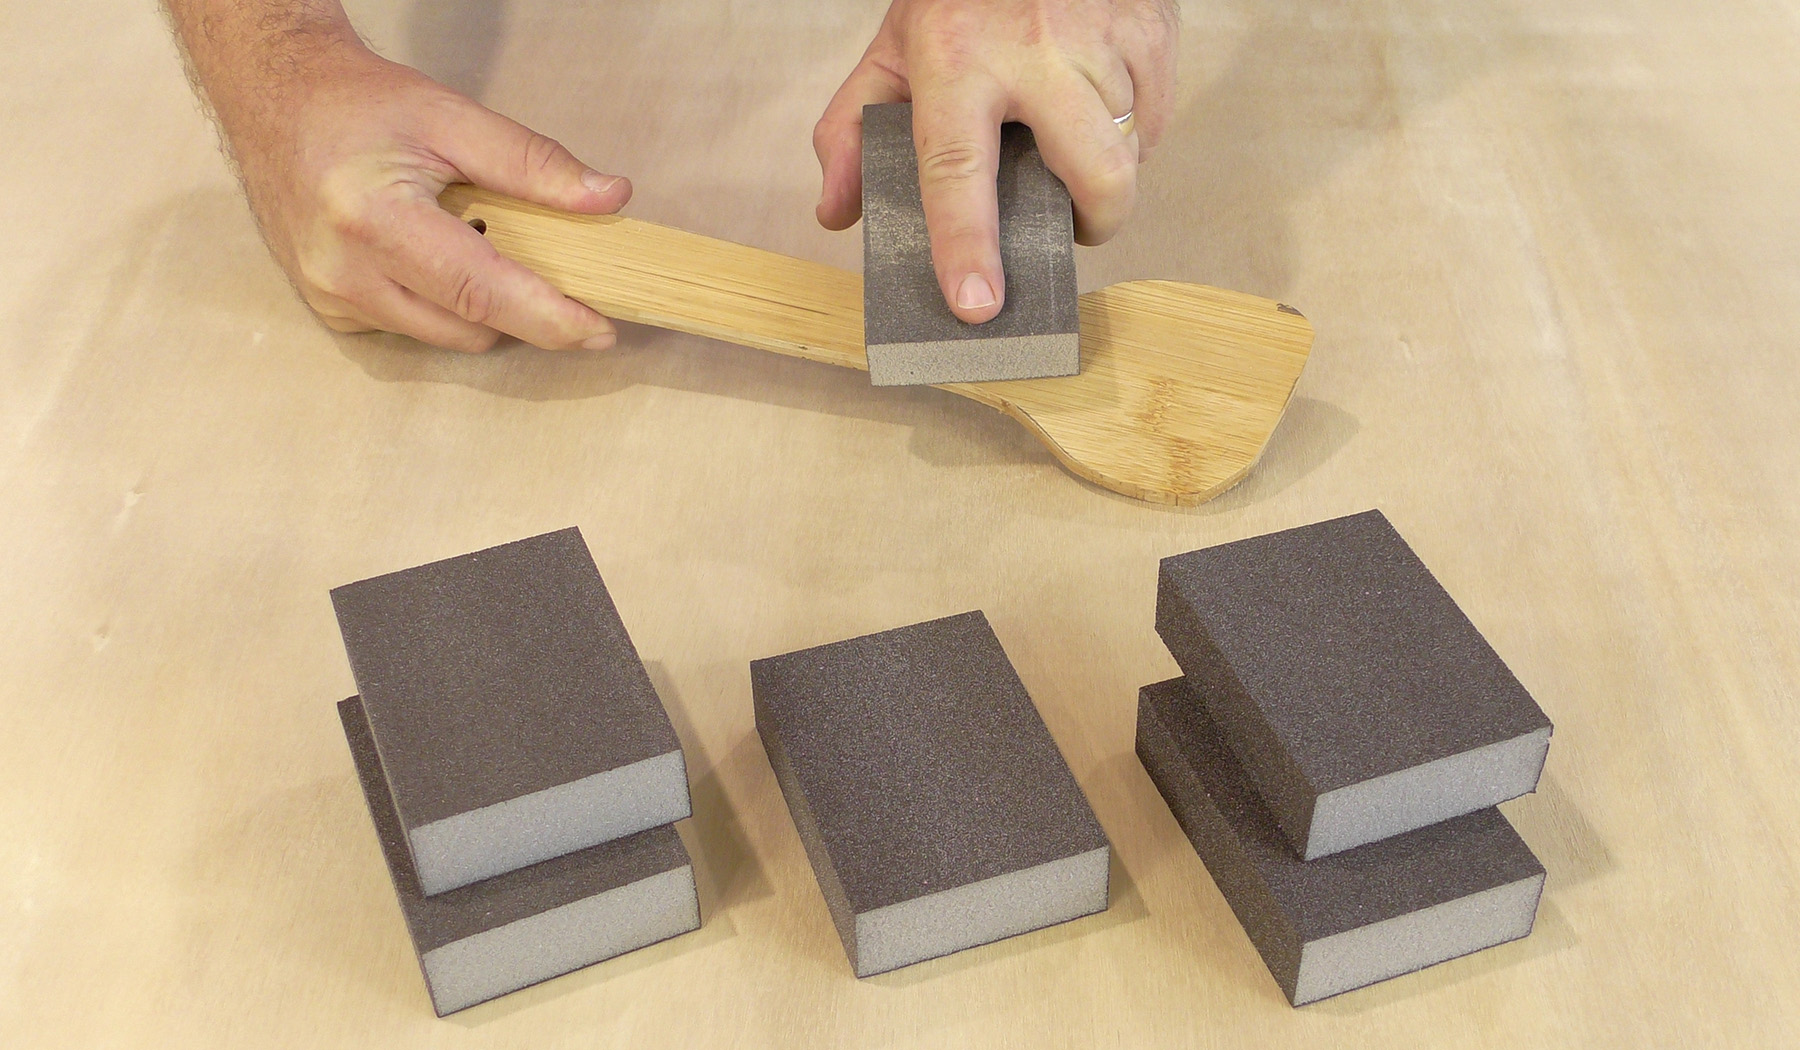 A craftsman uses a sanding sponge to sand a wooden spatula